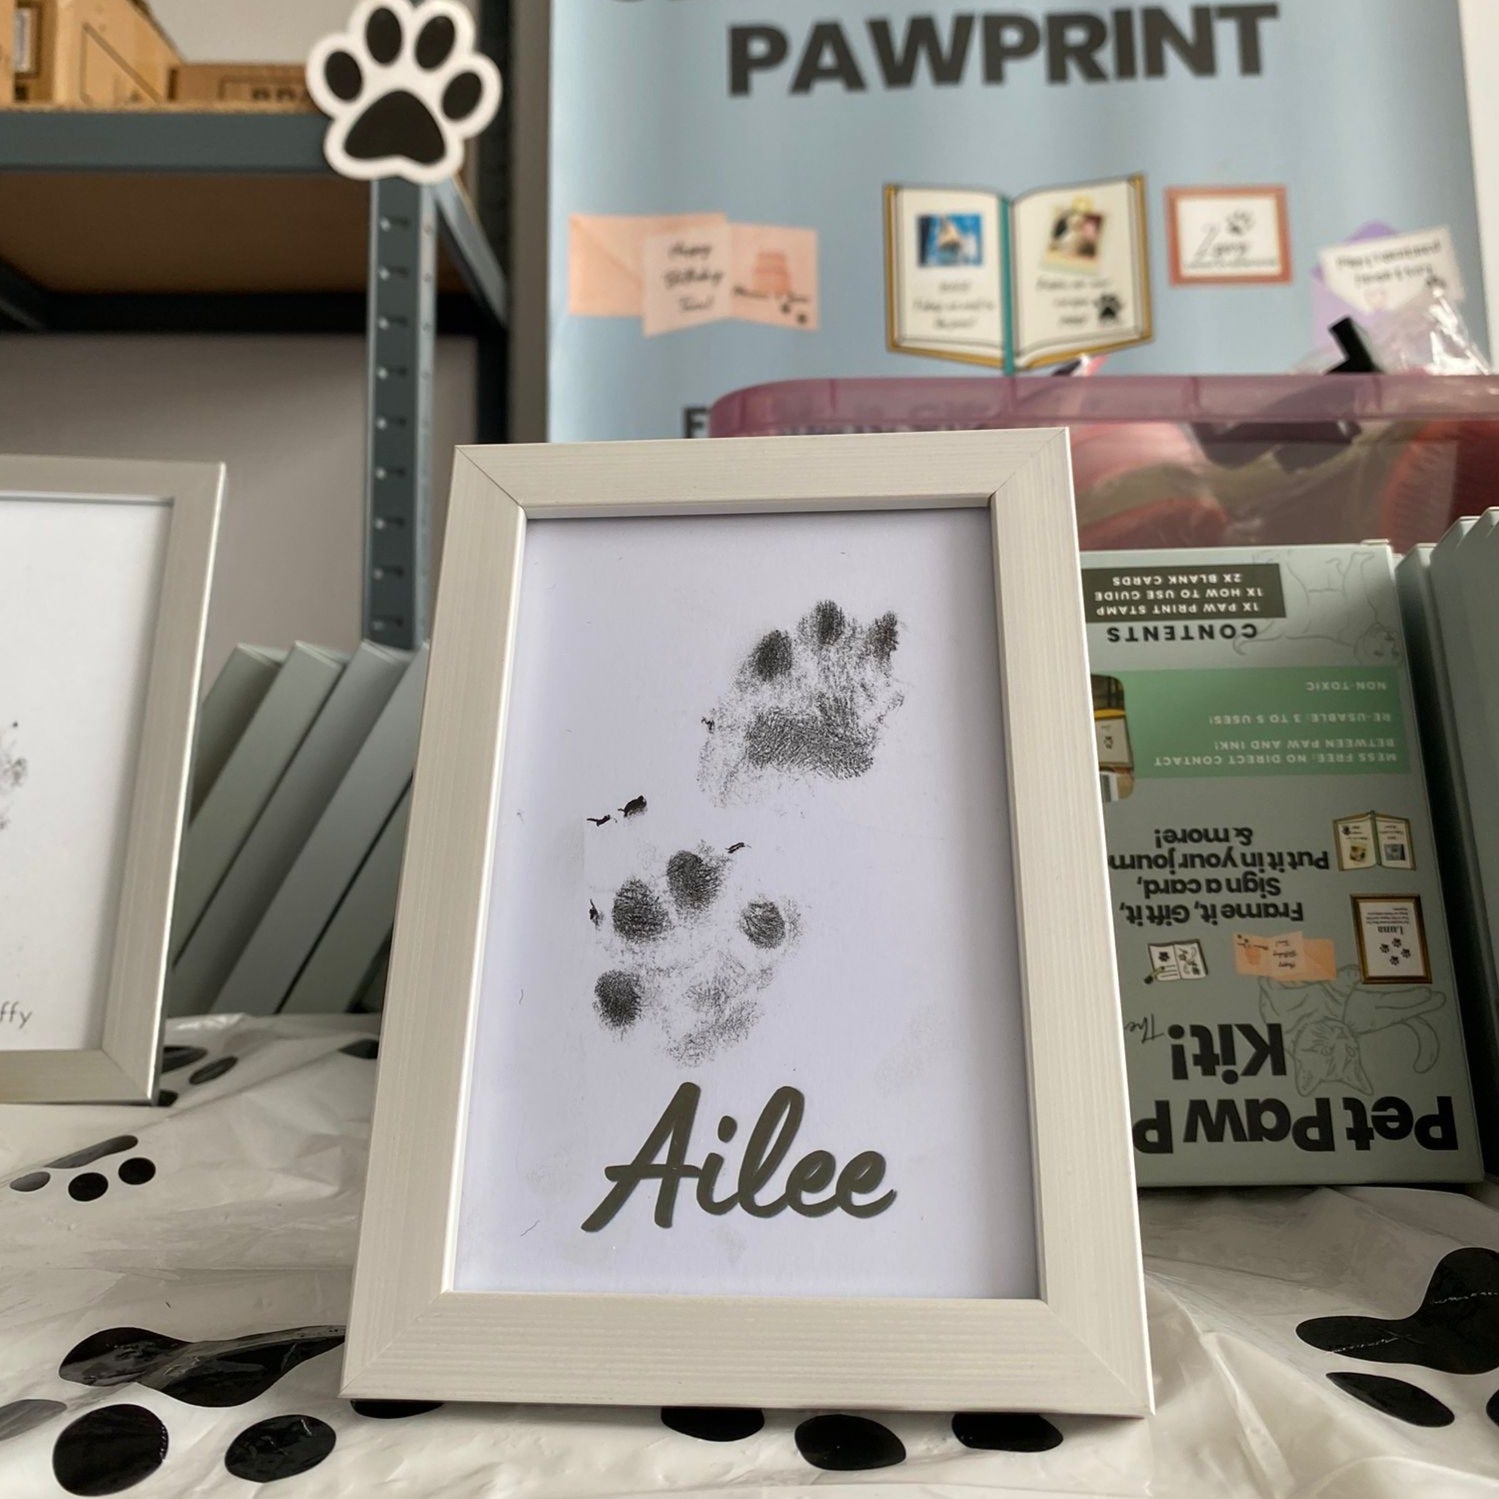 Paw Print Frame Kit - Dog Paw Print Kit and Cat Paw Print Kit for All Breeds - Pet Memorial Picture Frame, Mess Free Clean Touch Ink Pad, Pawprint